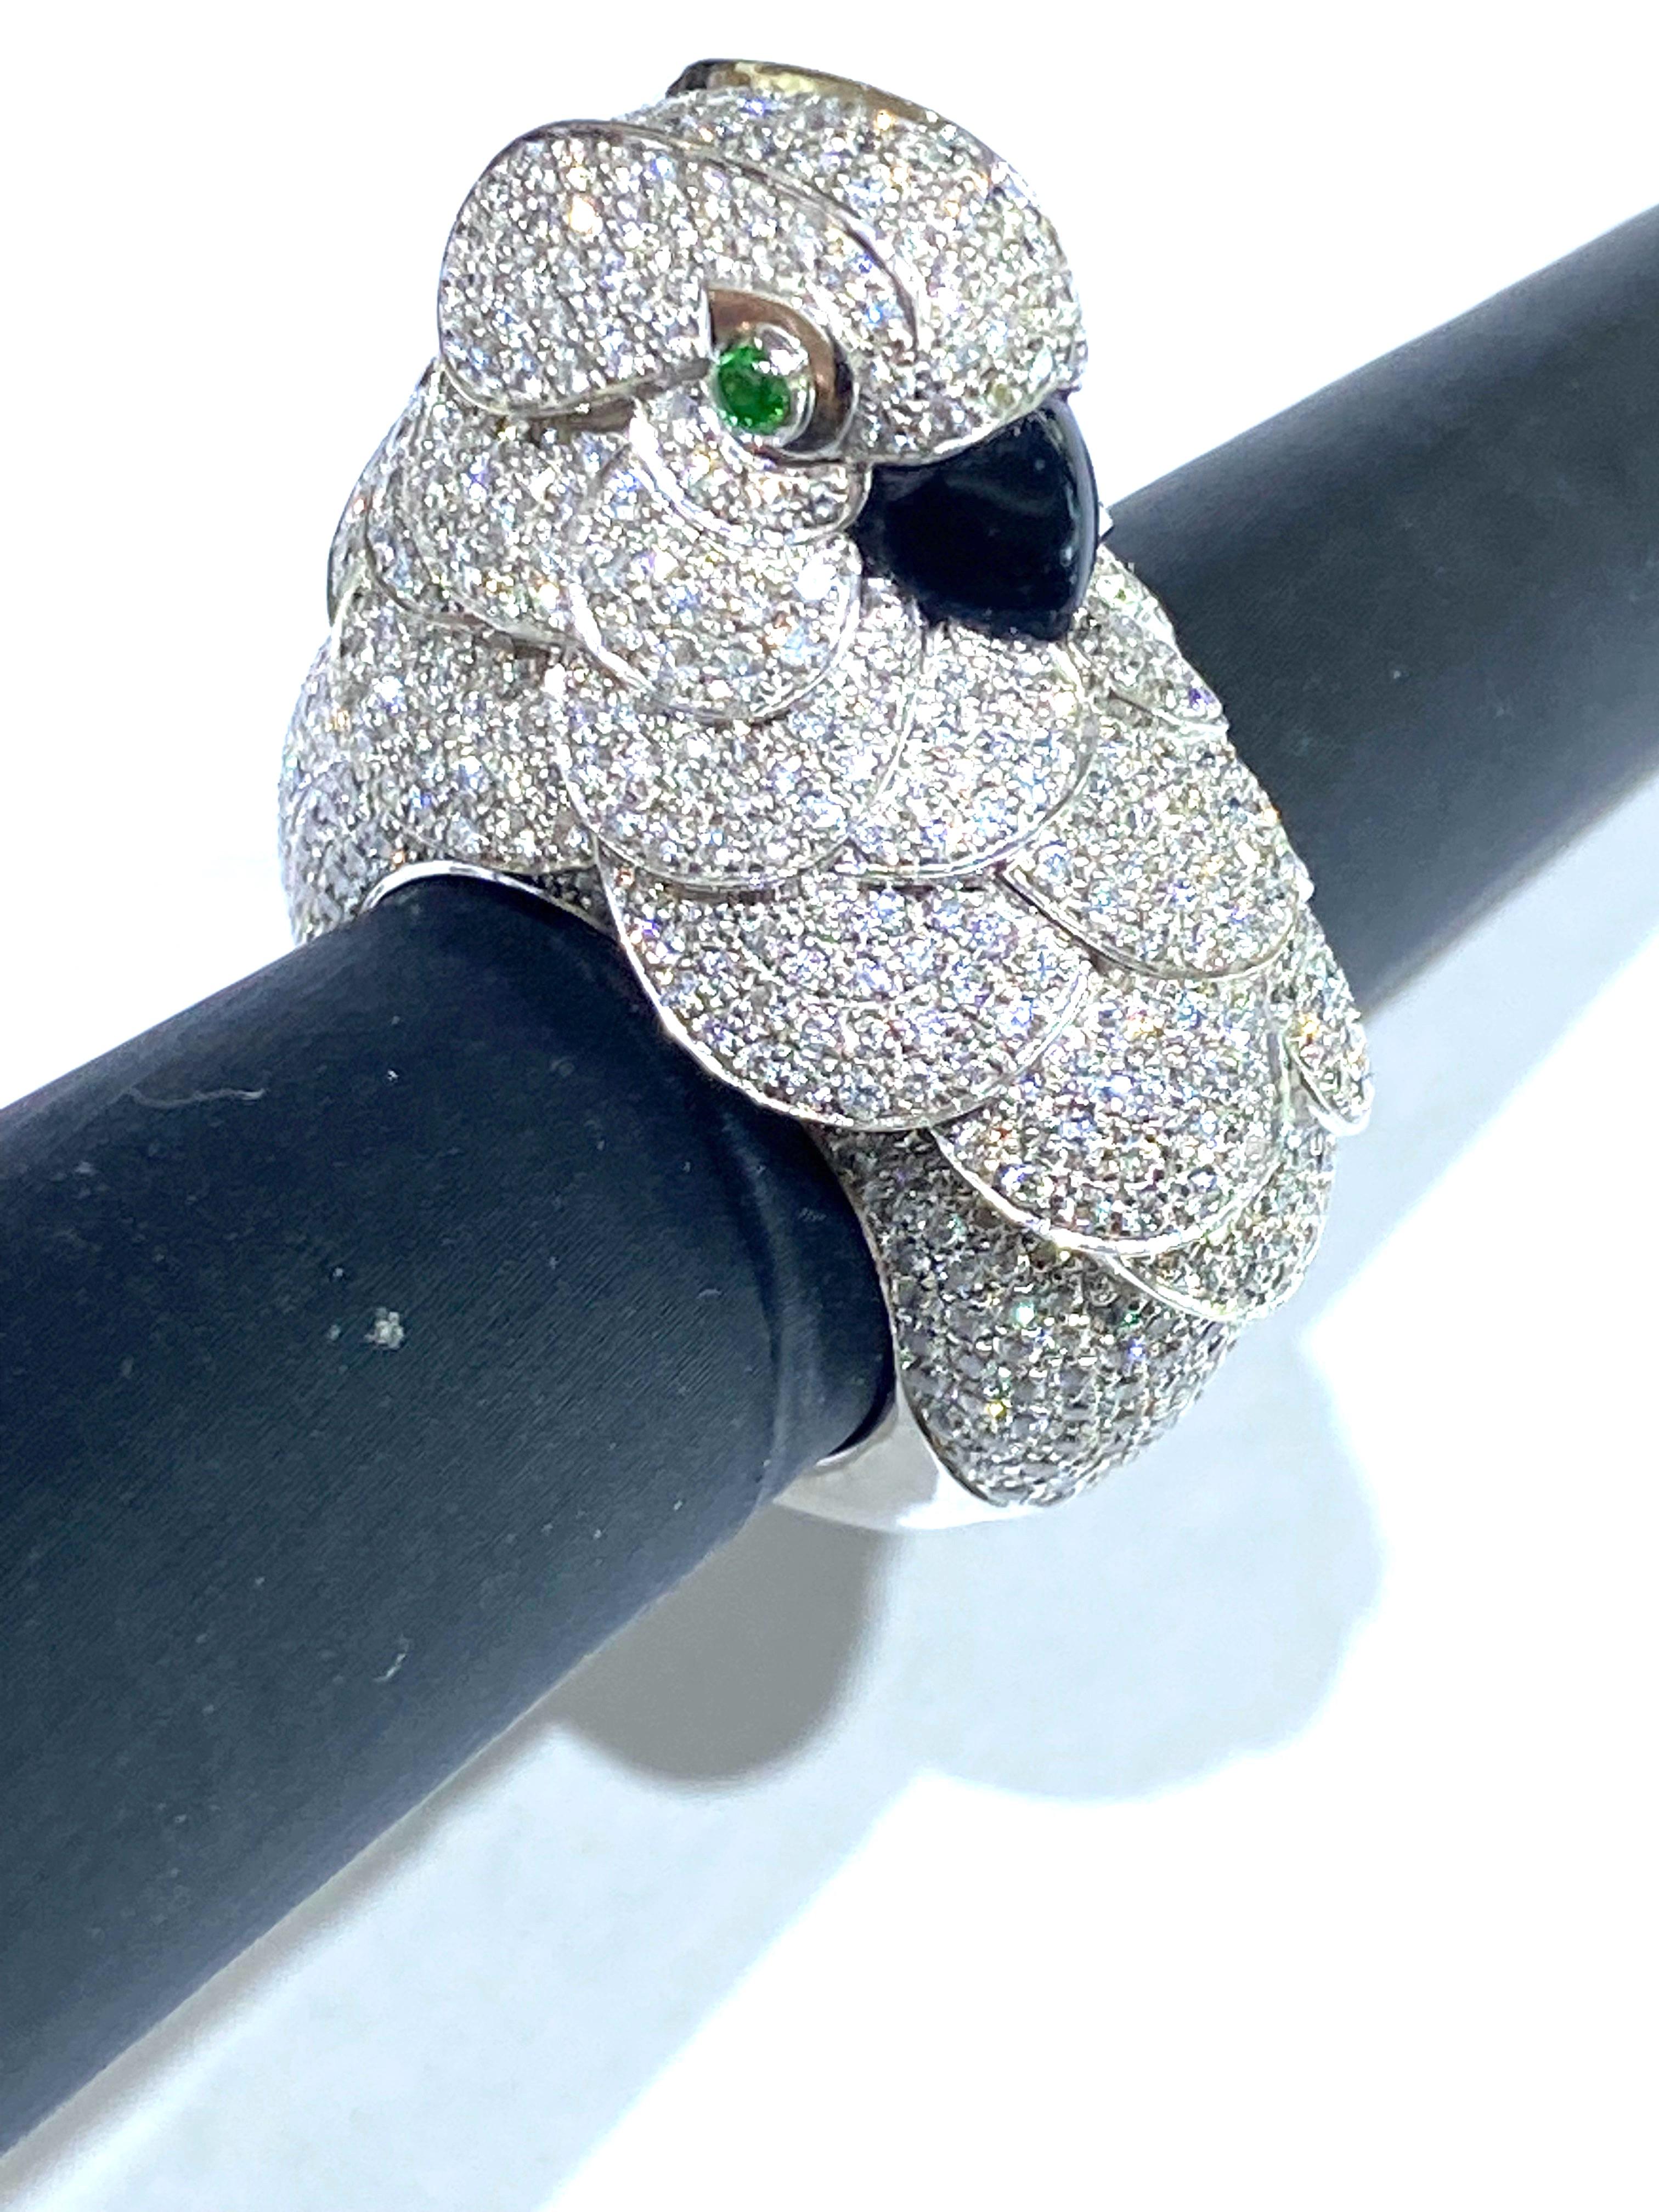 Women's or Men's 3 Carat Diamond Parrot Statement Ring with Emeralds and Black Onyx